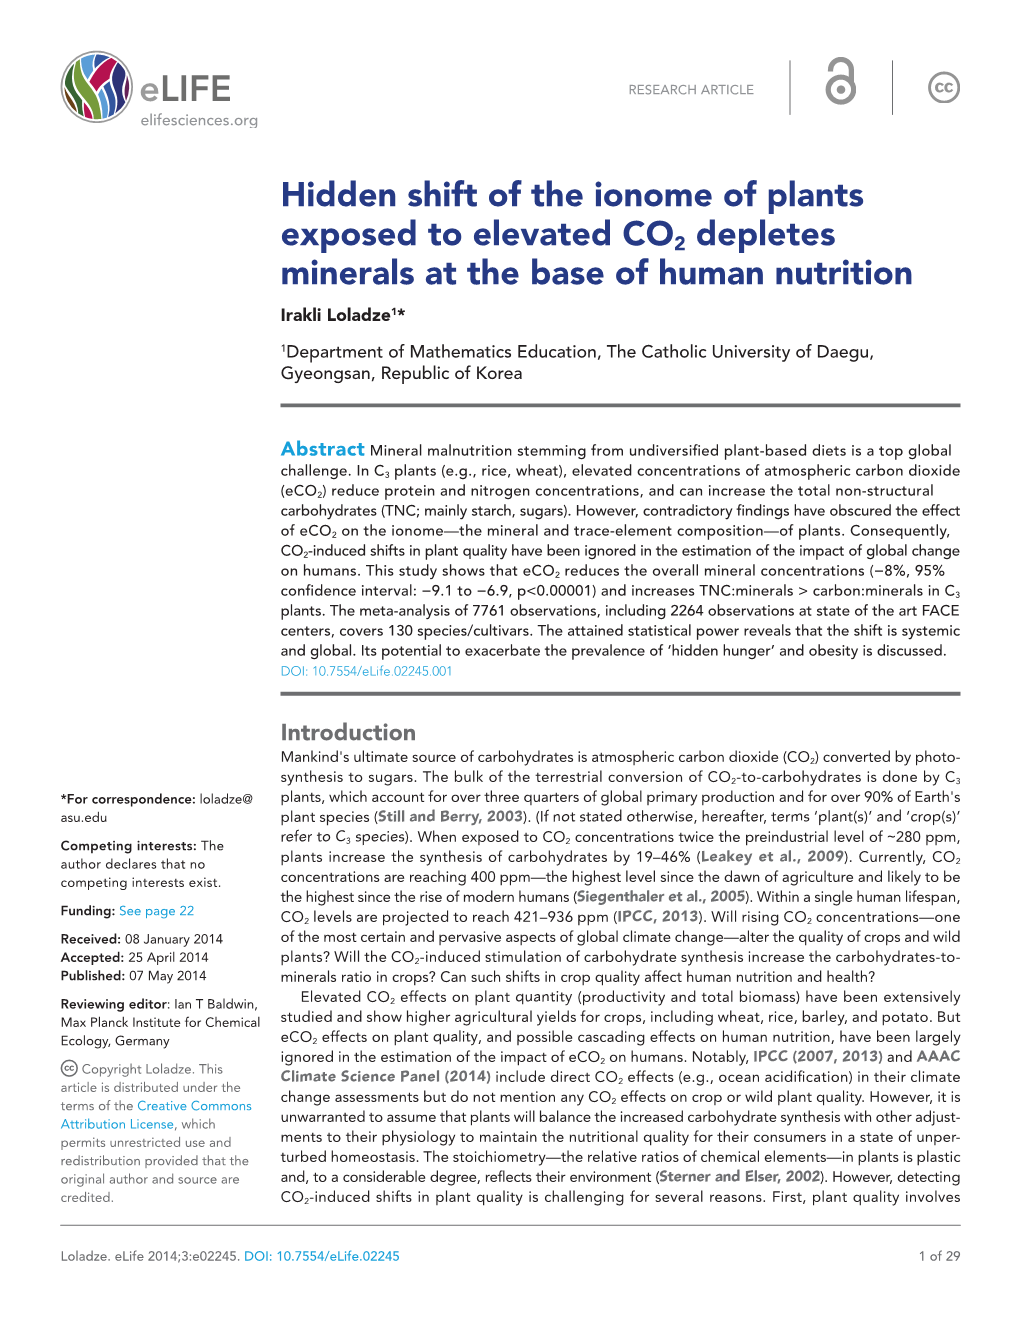 Hidden Shift of the Ionome of Plants Exposed to Elevated CO2 Depletes